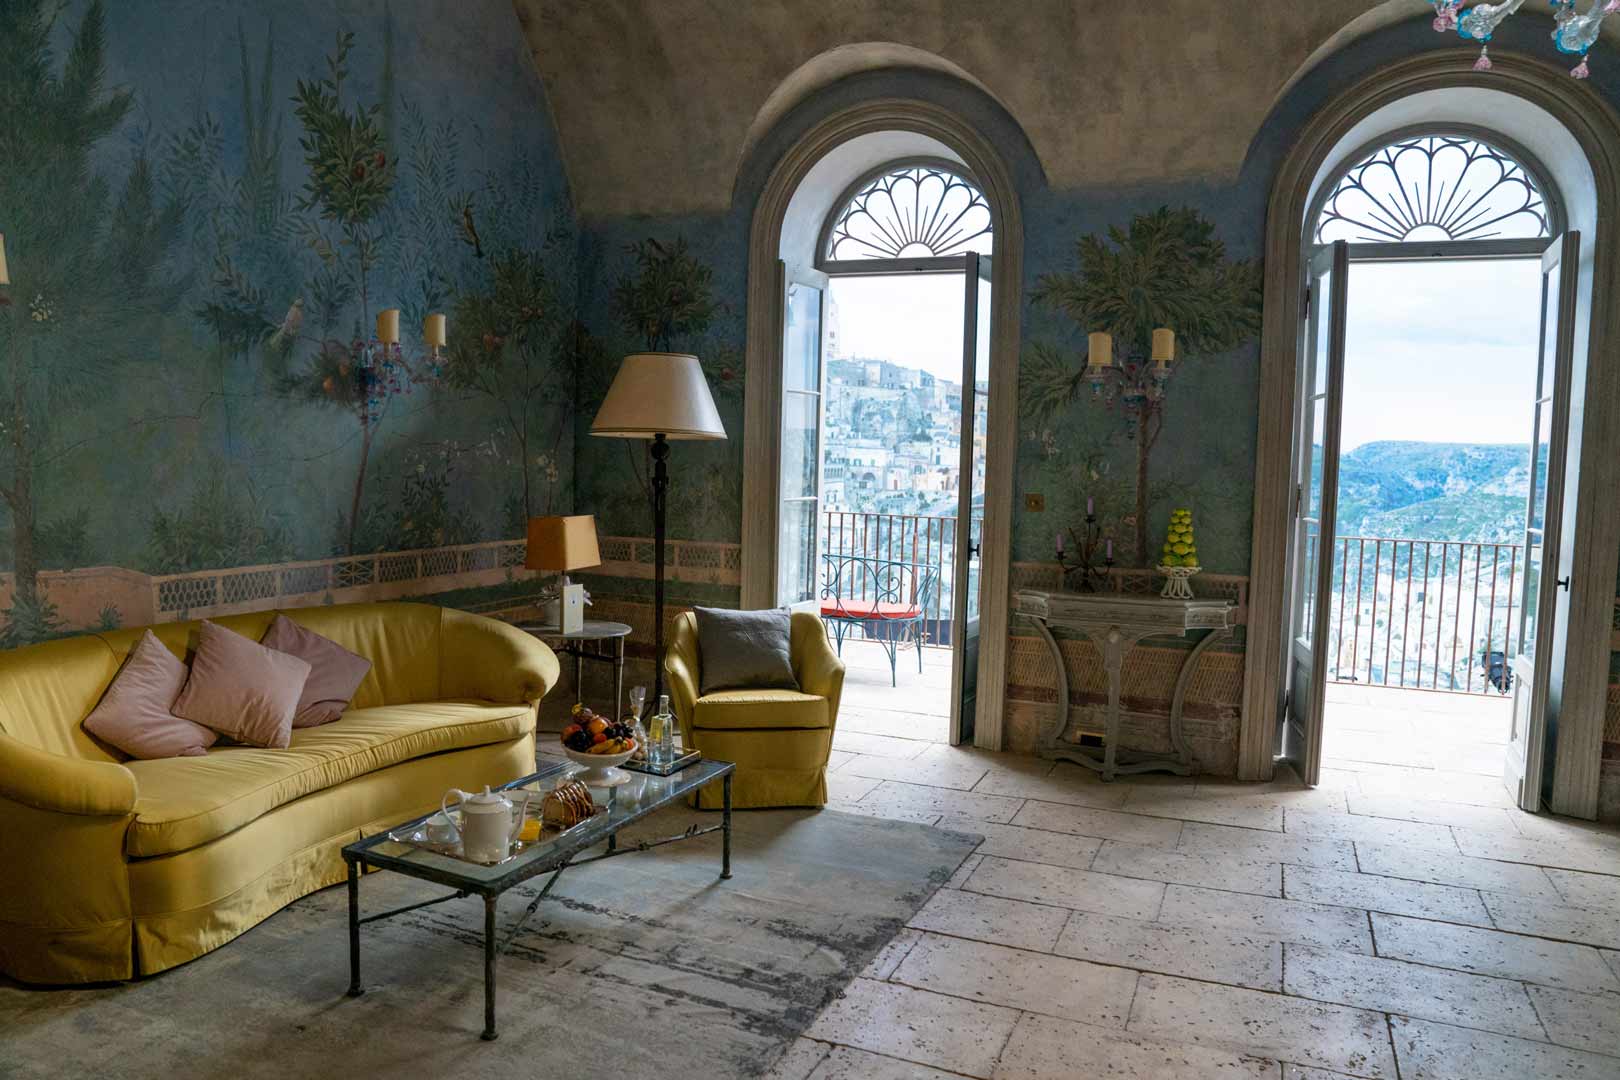 Interior Design In The Movies James Bond Italian Rustic Hilltop Hotel Suite With Blue Wall Mural Yellow Couch Arched Windows And Recessed Limestone Wall Niches 1 